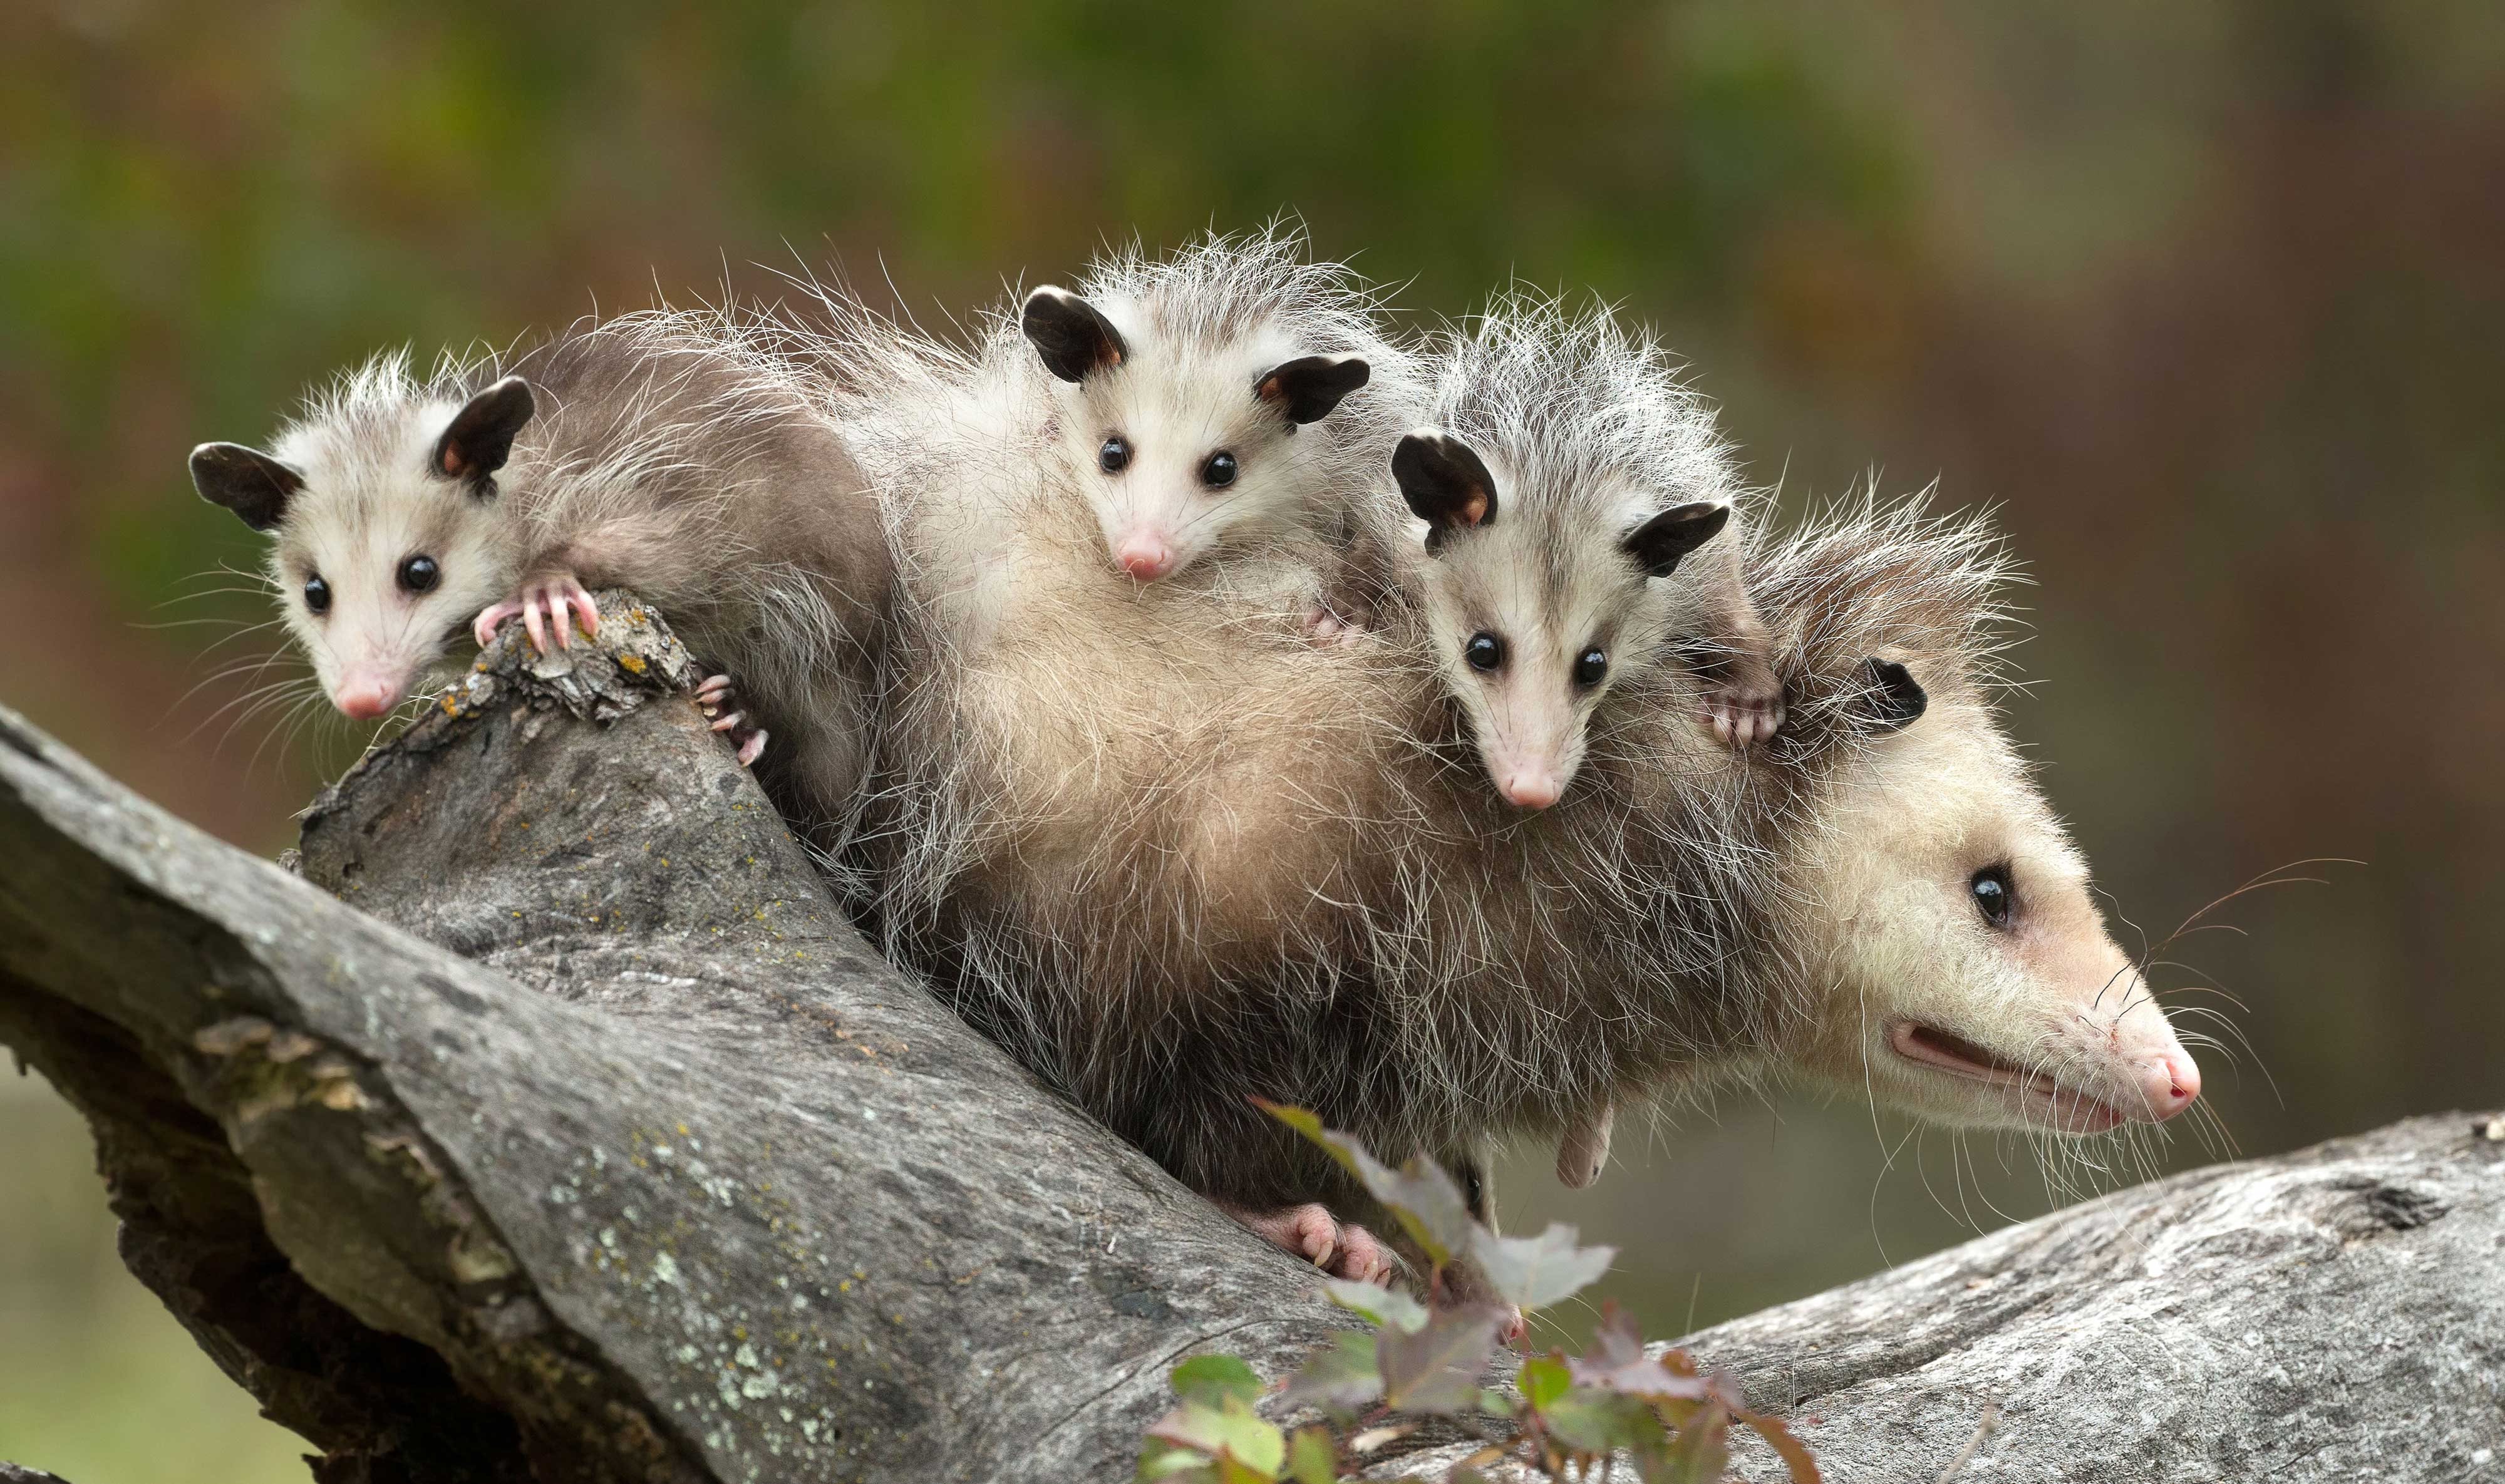 An opossum with babies on her back.